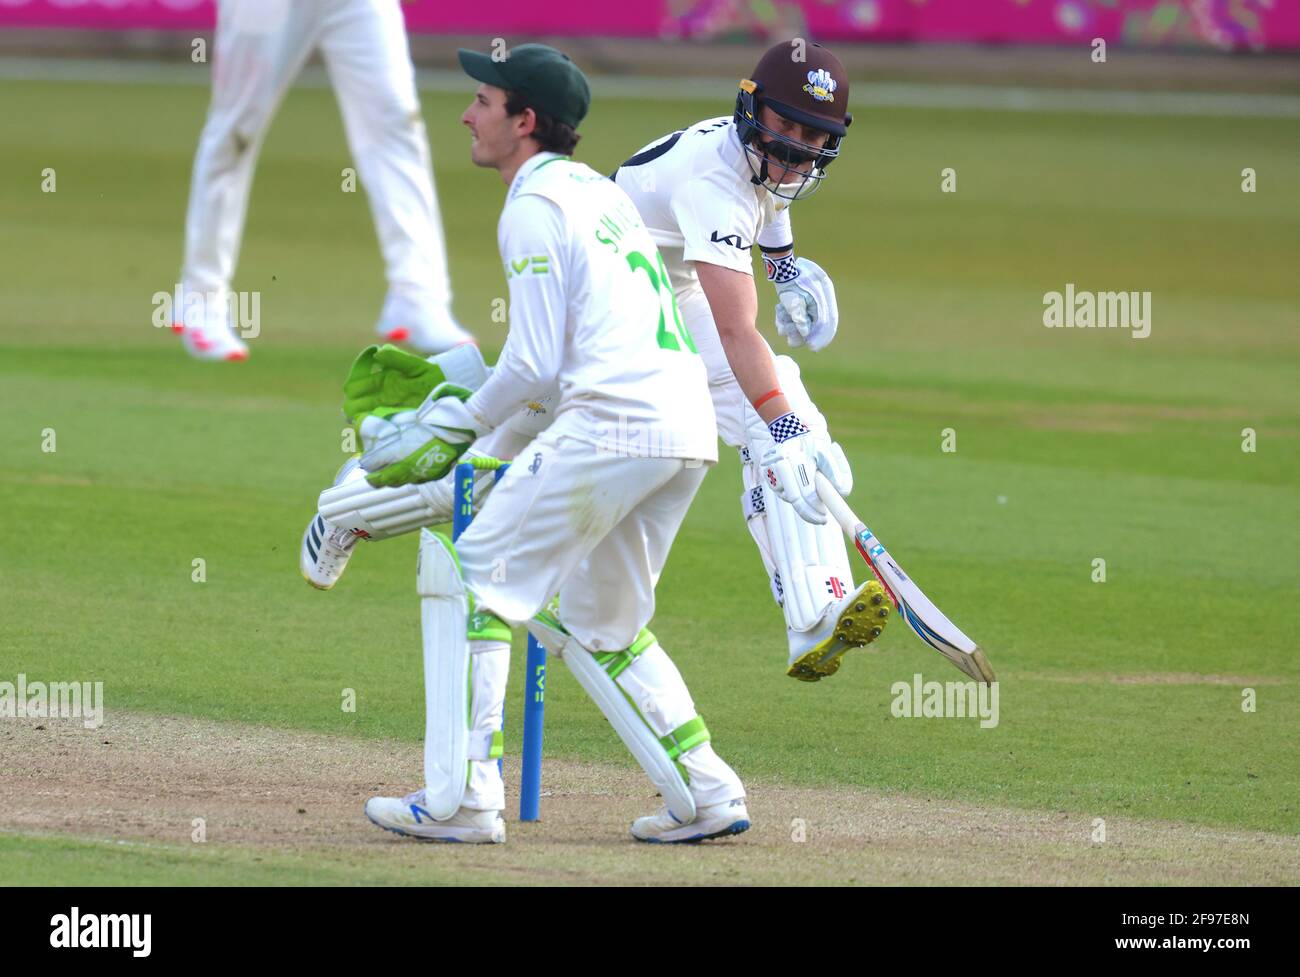 16 April, 2021. London, UK. Surrey’s Ollie Pope survives a quick single with a comedy moustache as Surrey take on Leicestershire in  the County Championship at the Kia Oval, day two. David Rowe/Alamy Live News Stock Photo